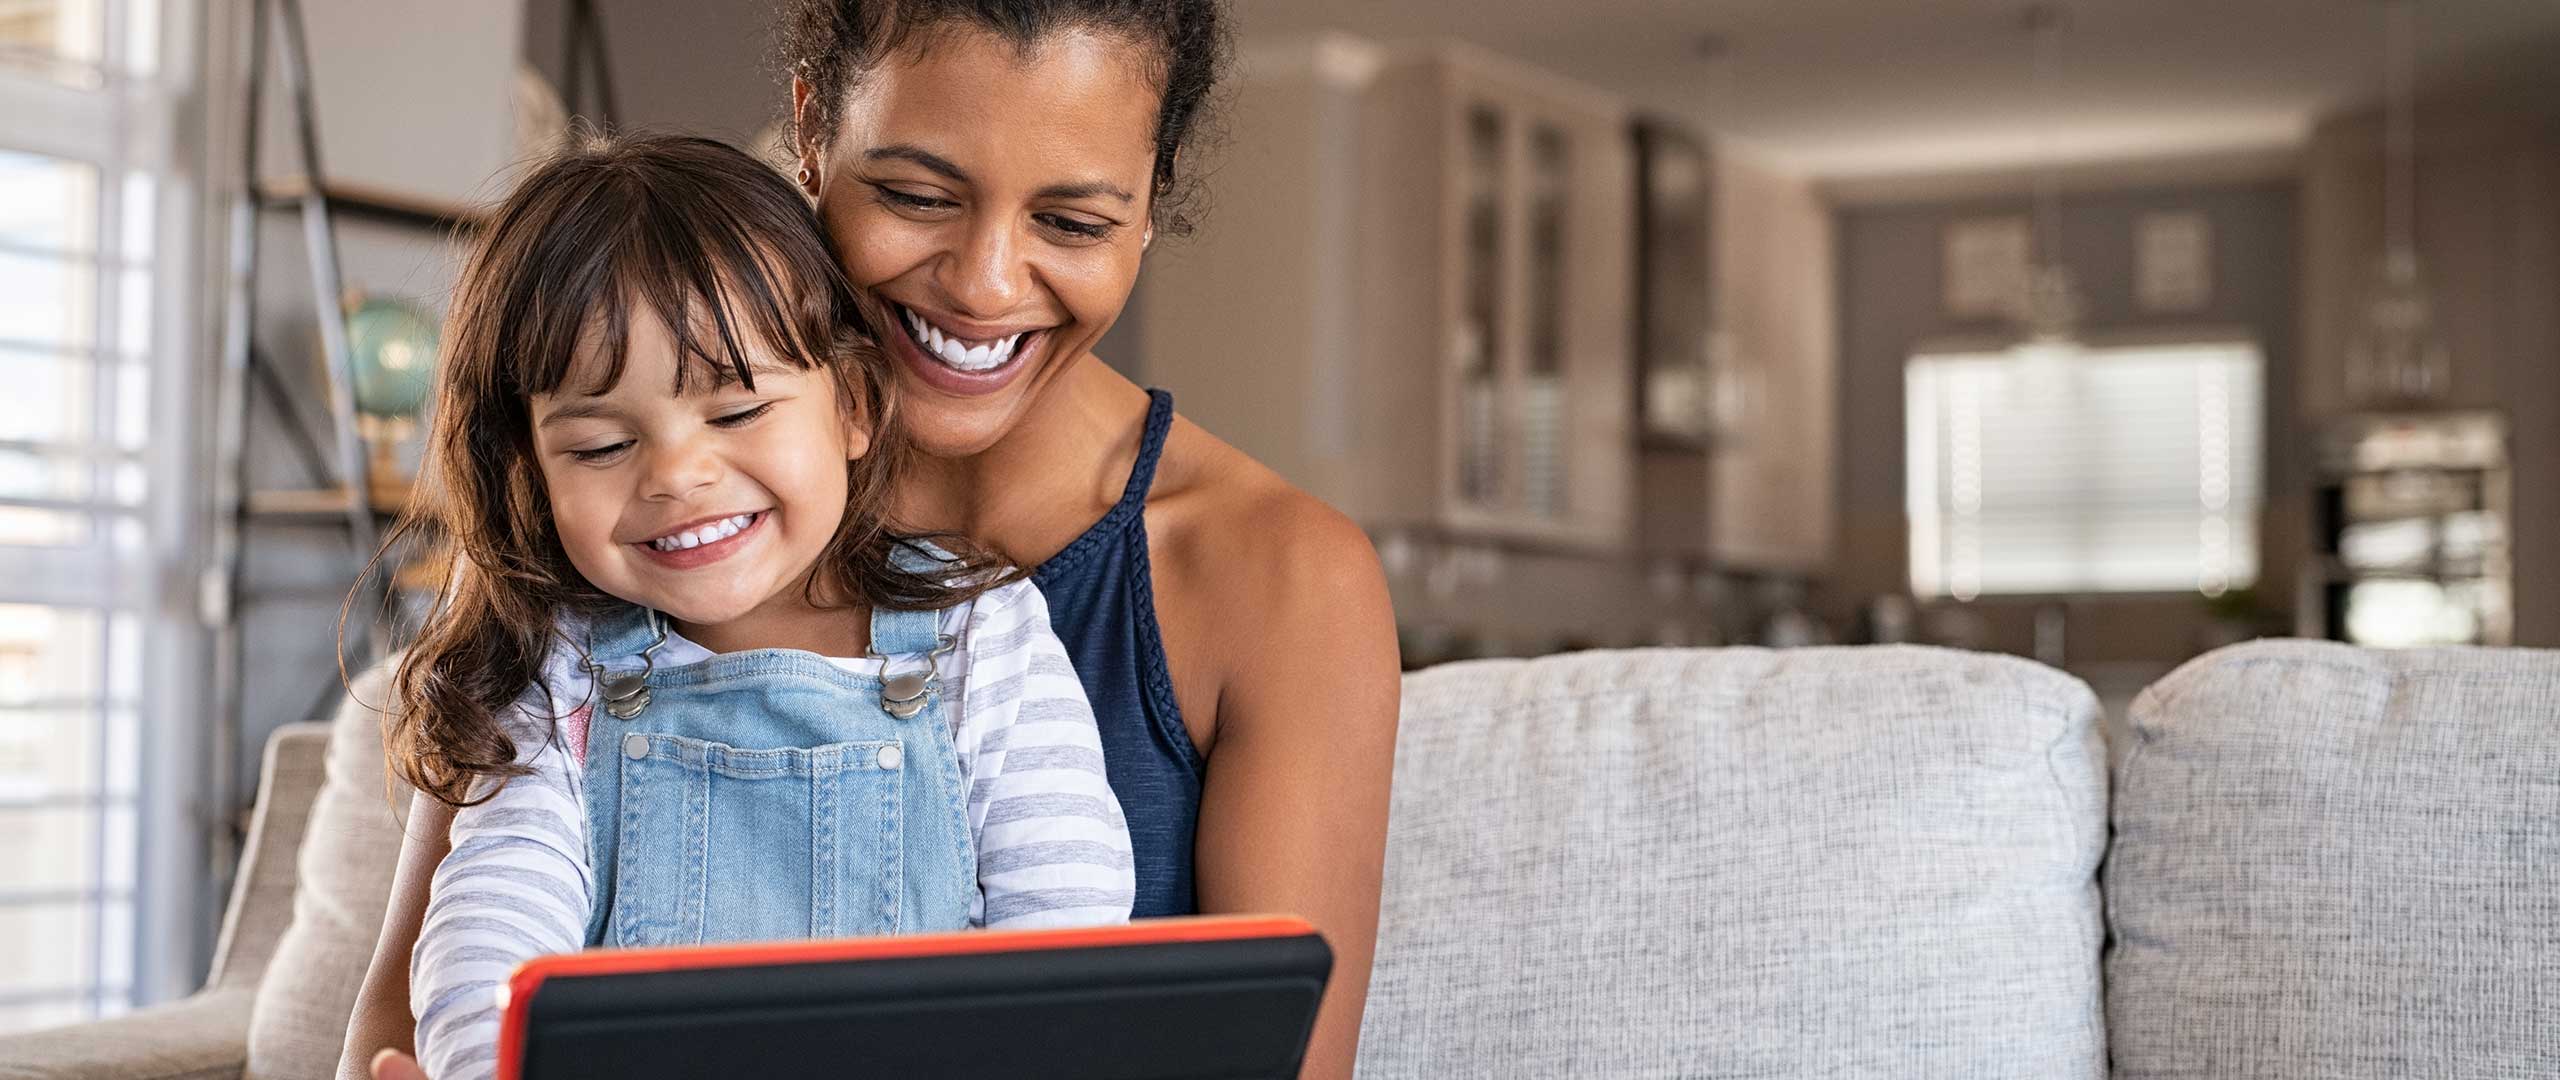 Woman and child sitting with a tablet device